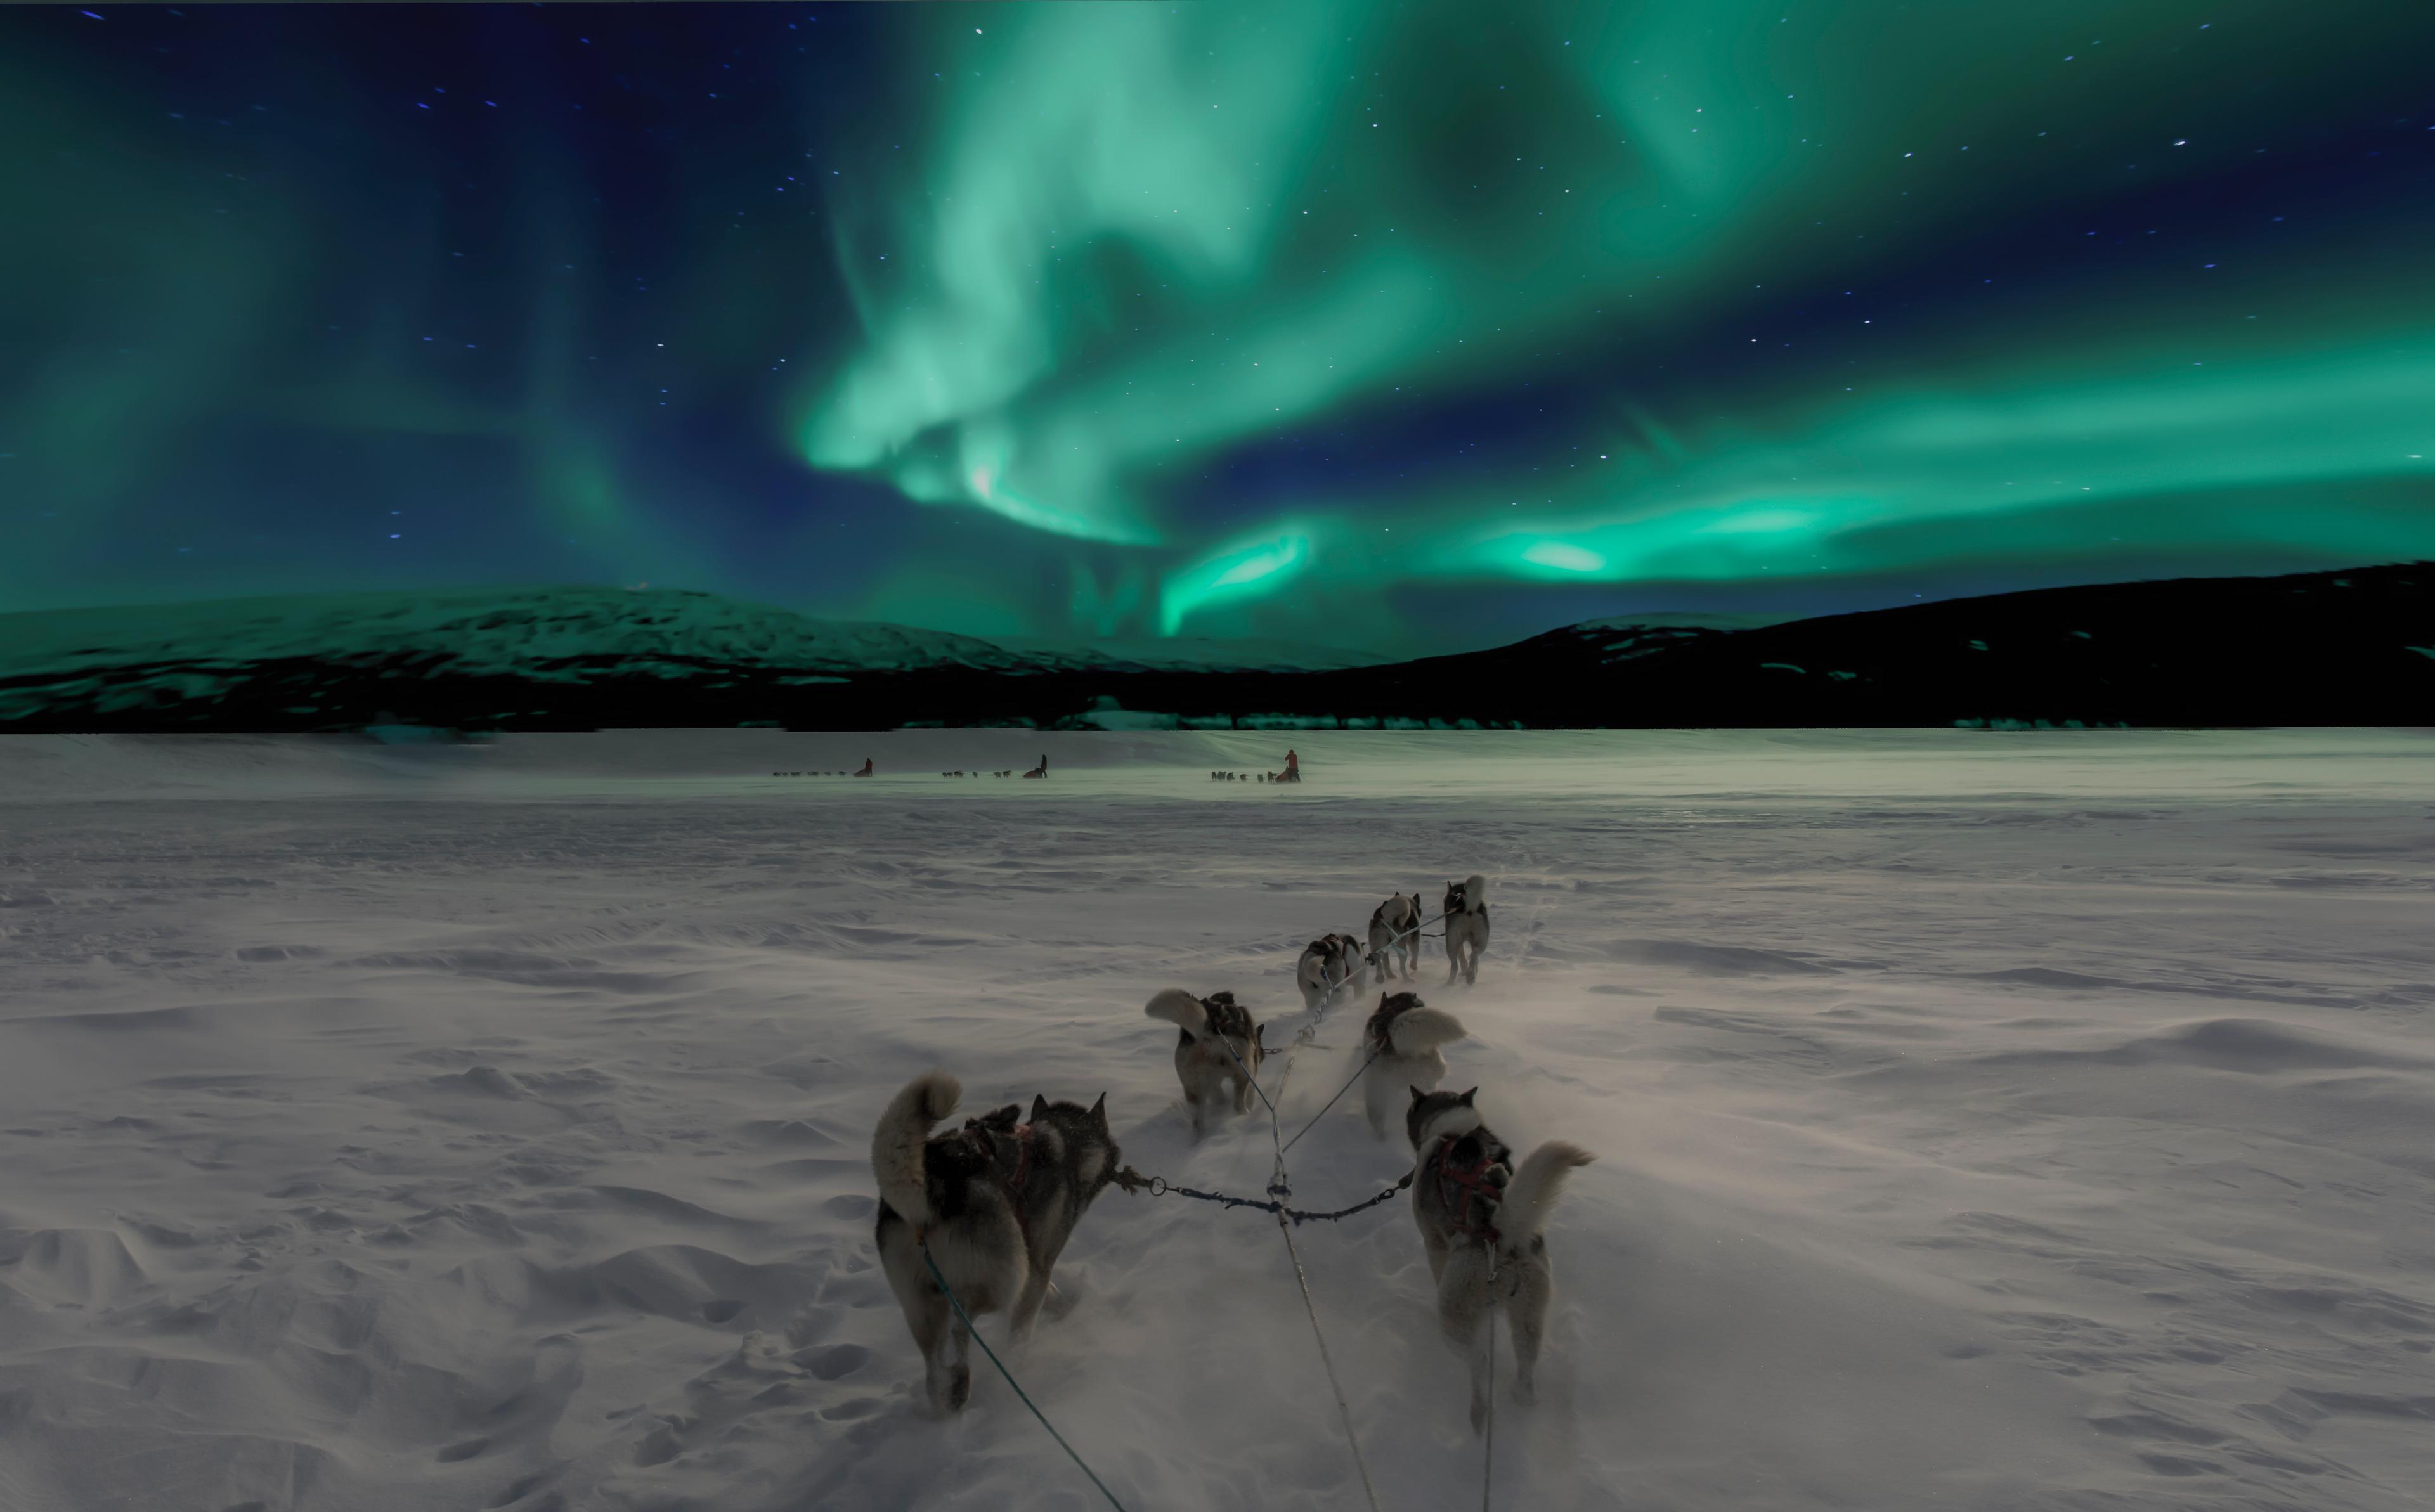 A team of sled dogs races across a snowy landscape under a stunning display of the Northern Lights, with the vibrant green aurora filling the sky above the distant mountains.